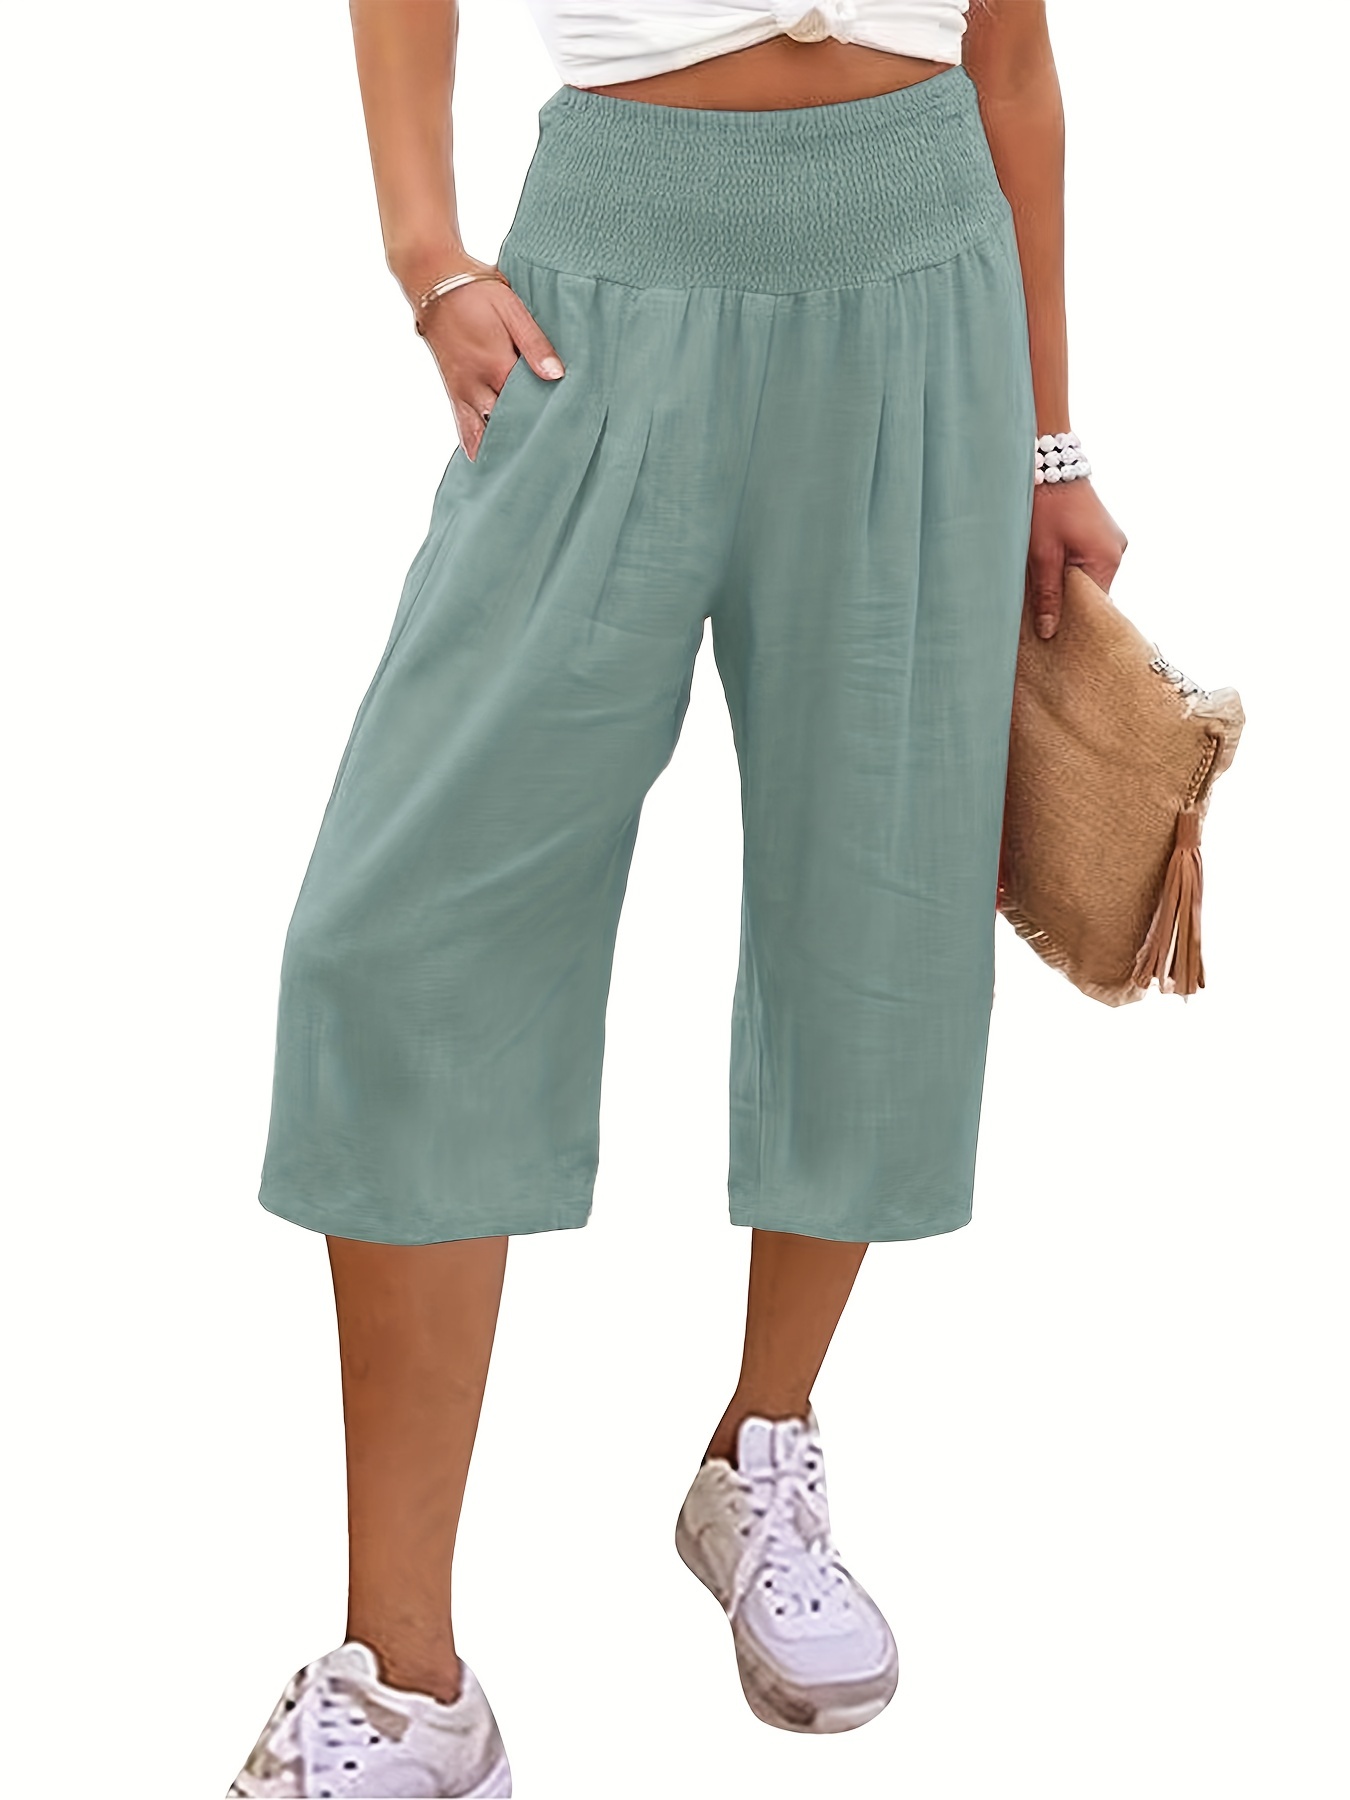 Ladies Women 3/4 Cropped Trousers Stretchy Summer Cotton Capri